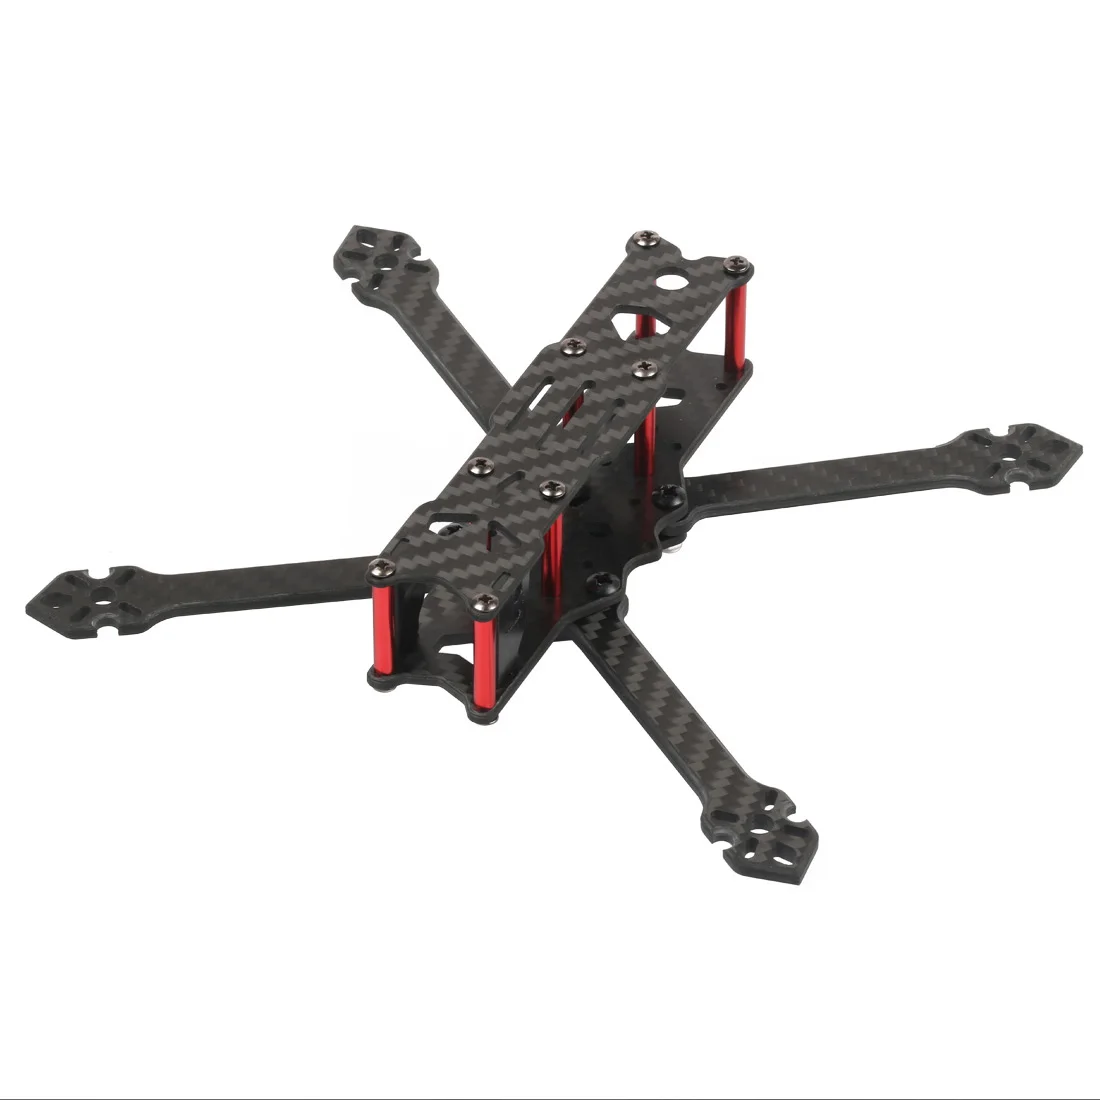 FEICHAO F4 X1 175mm 4 inch Freestyle Frame with 3.5mm Arm Thickness compatible 4inch propeller for FPV Racing Drone - купить по